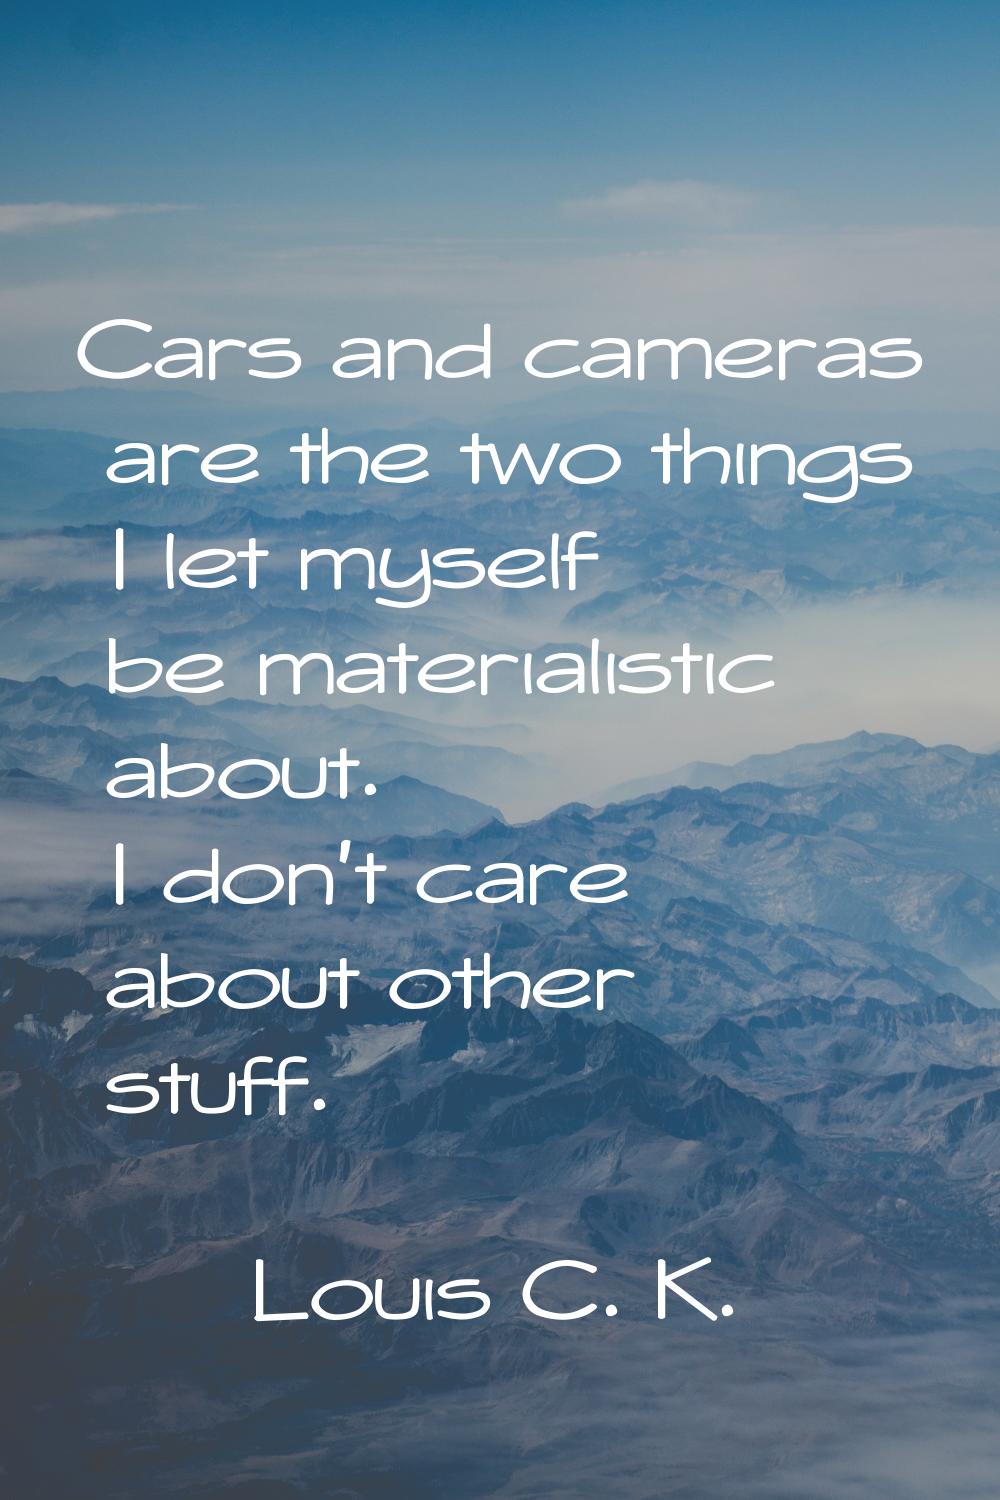 Cars and cameras are the two things I let myself be materialistic about. I don't care about other s